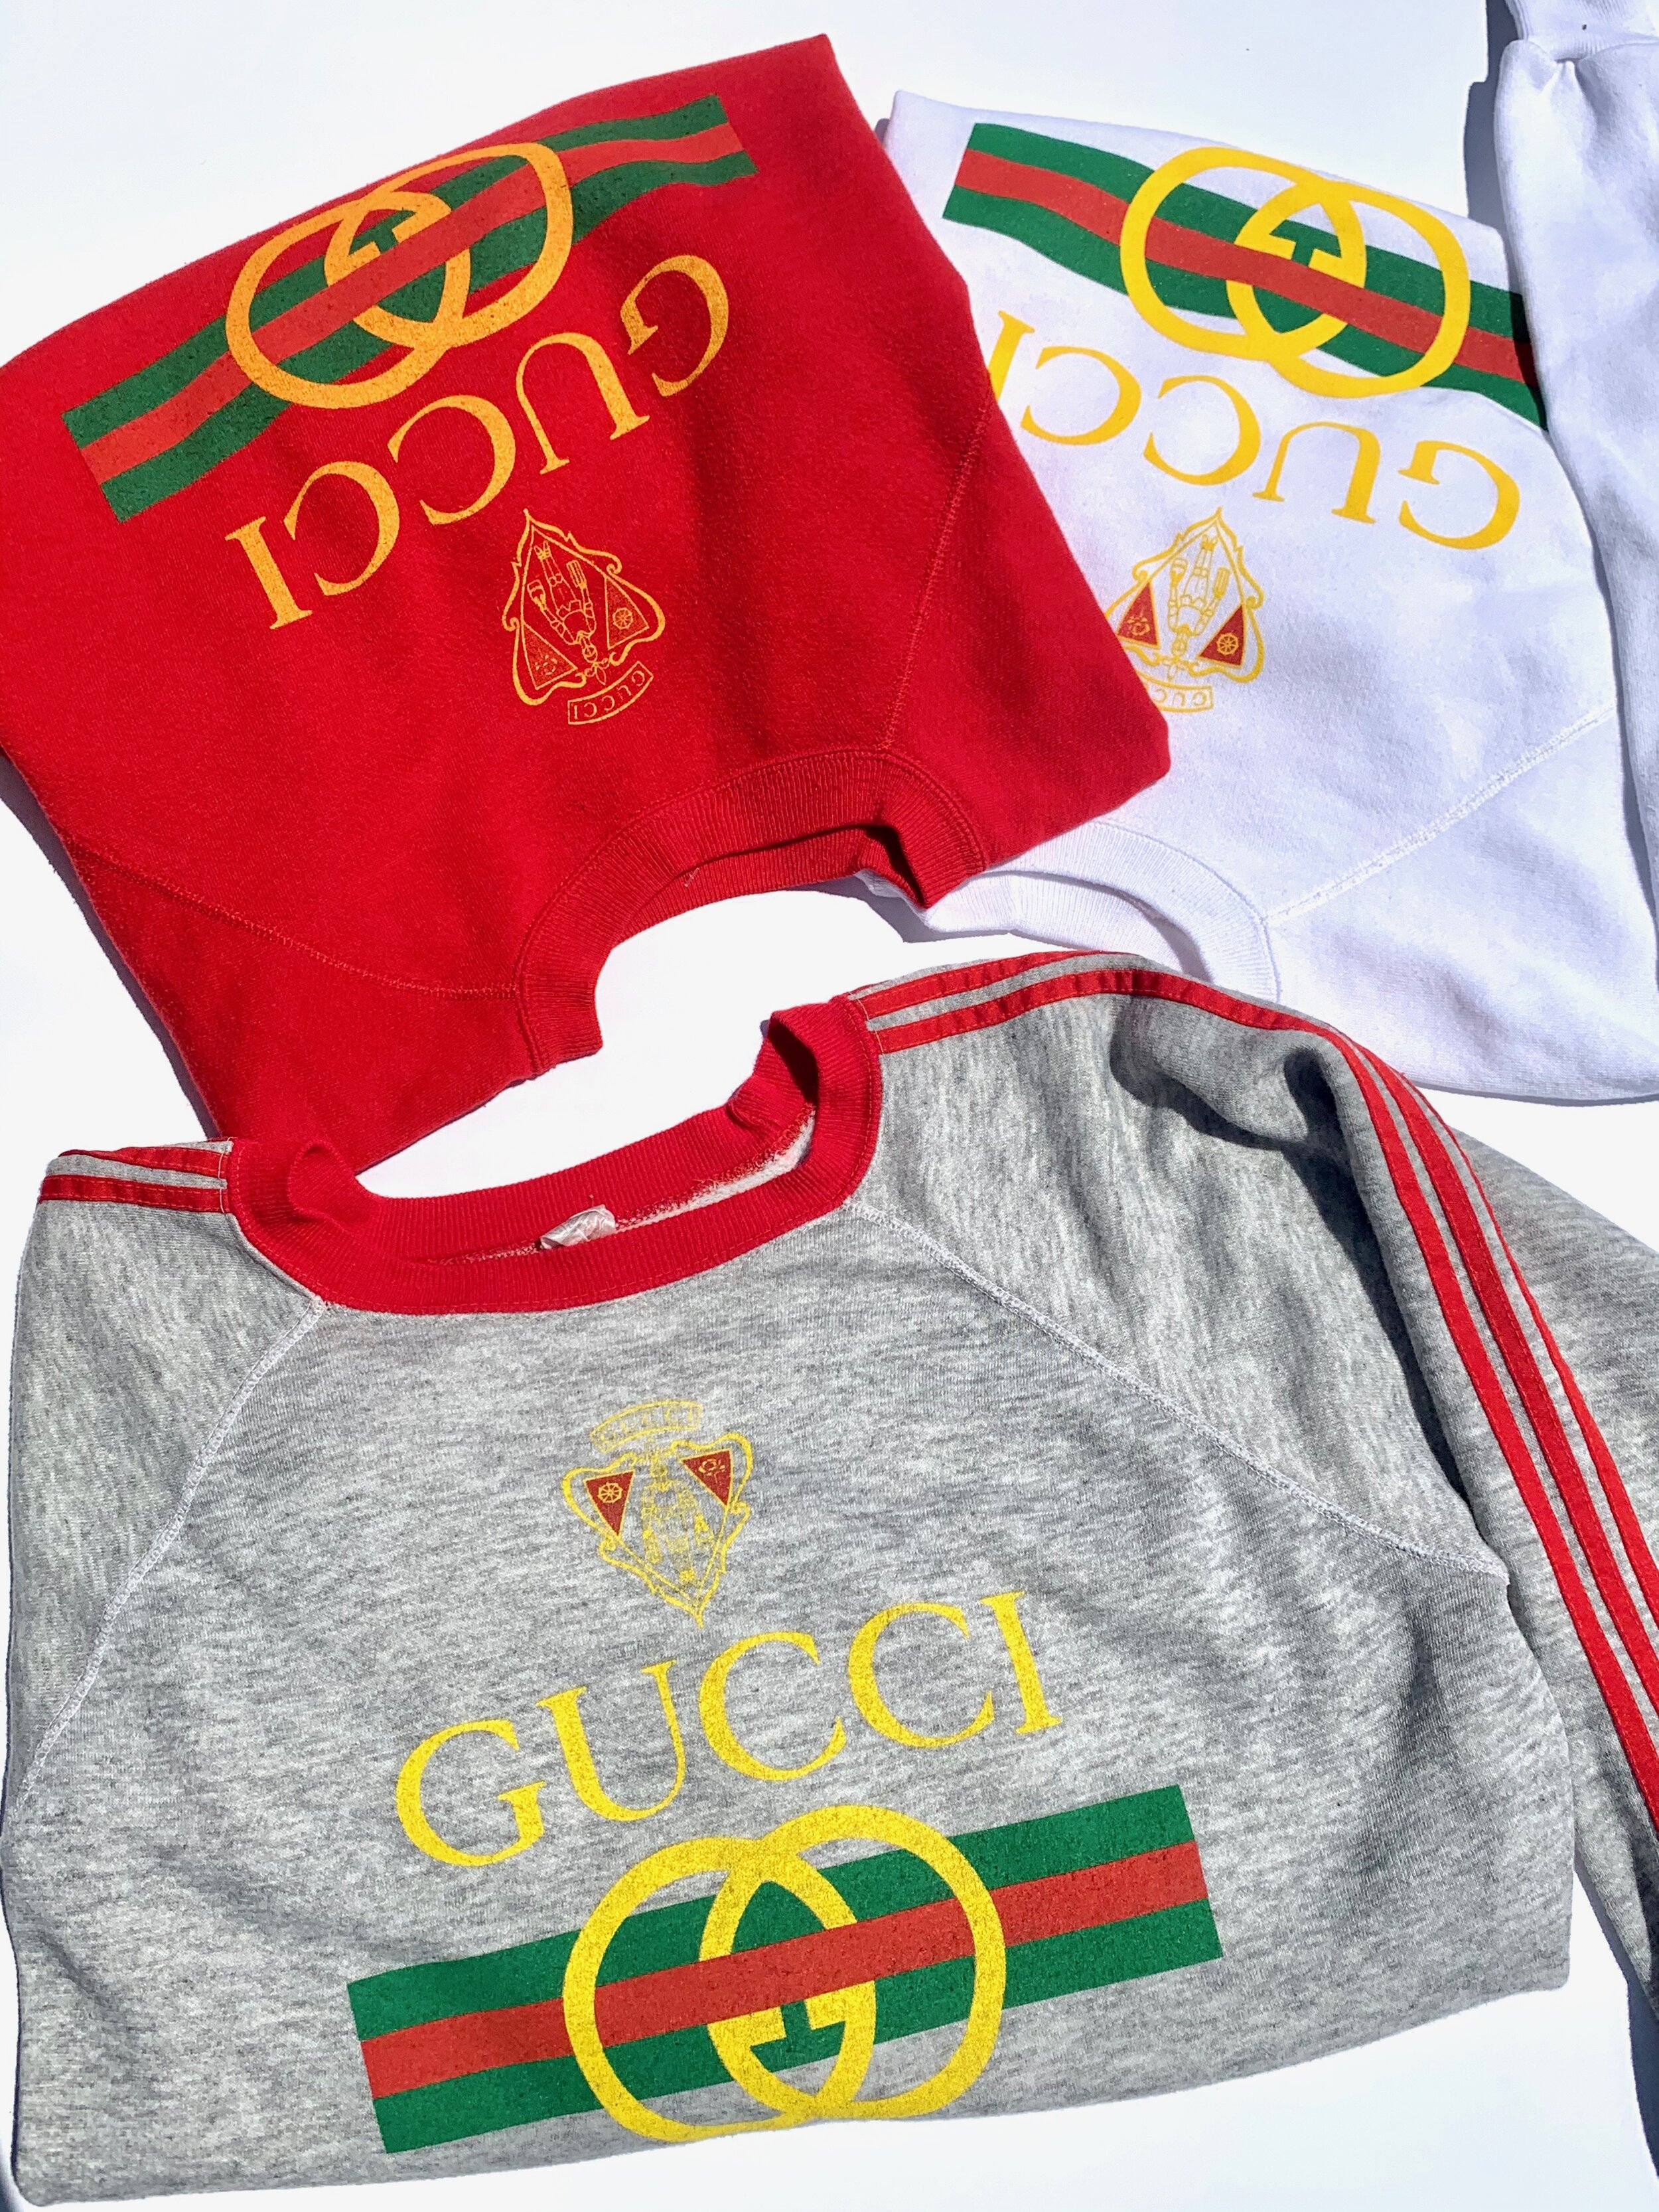 vintage bootleg gucci sweater